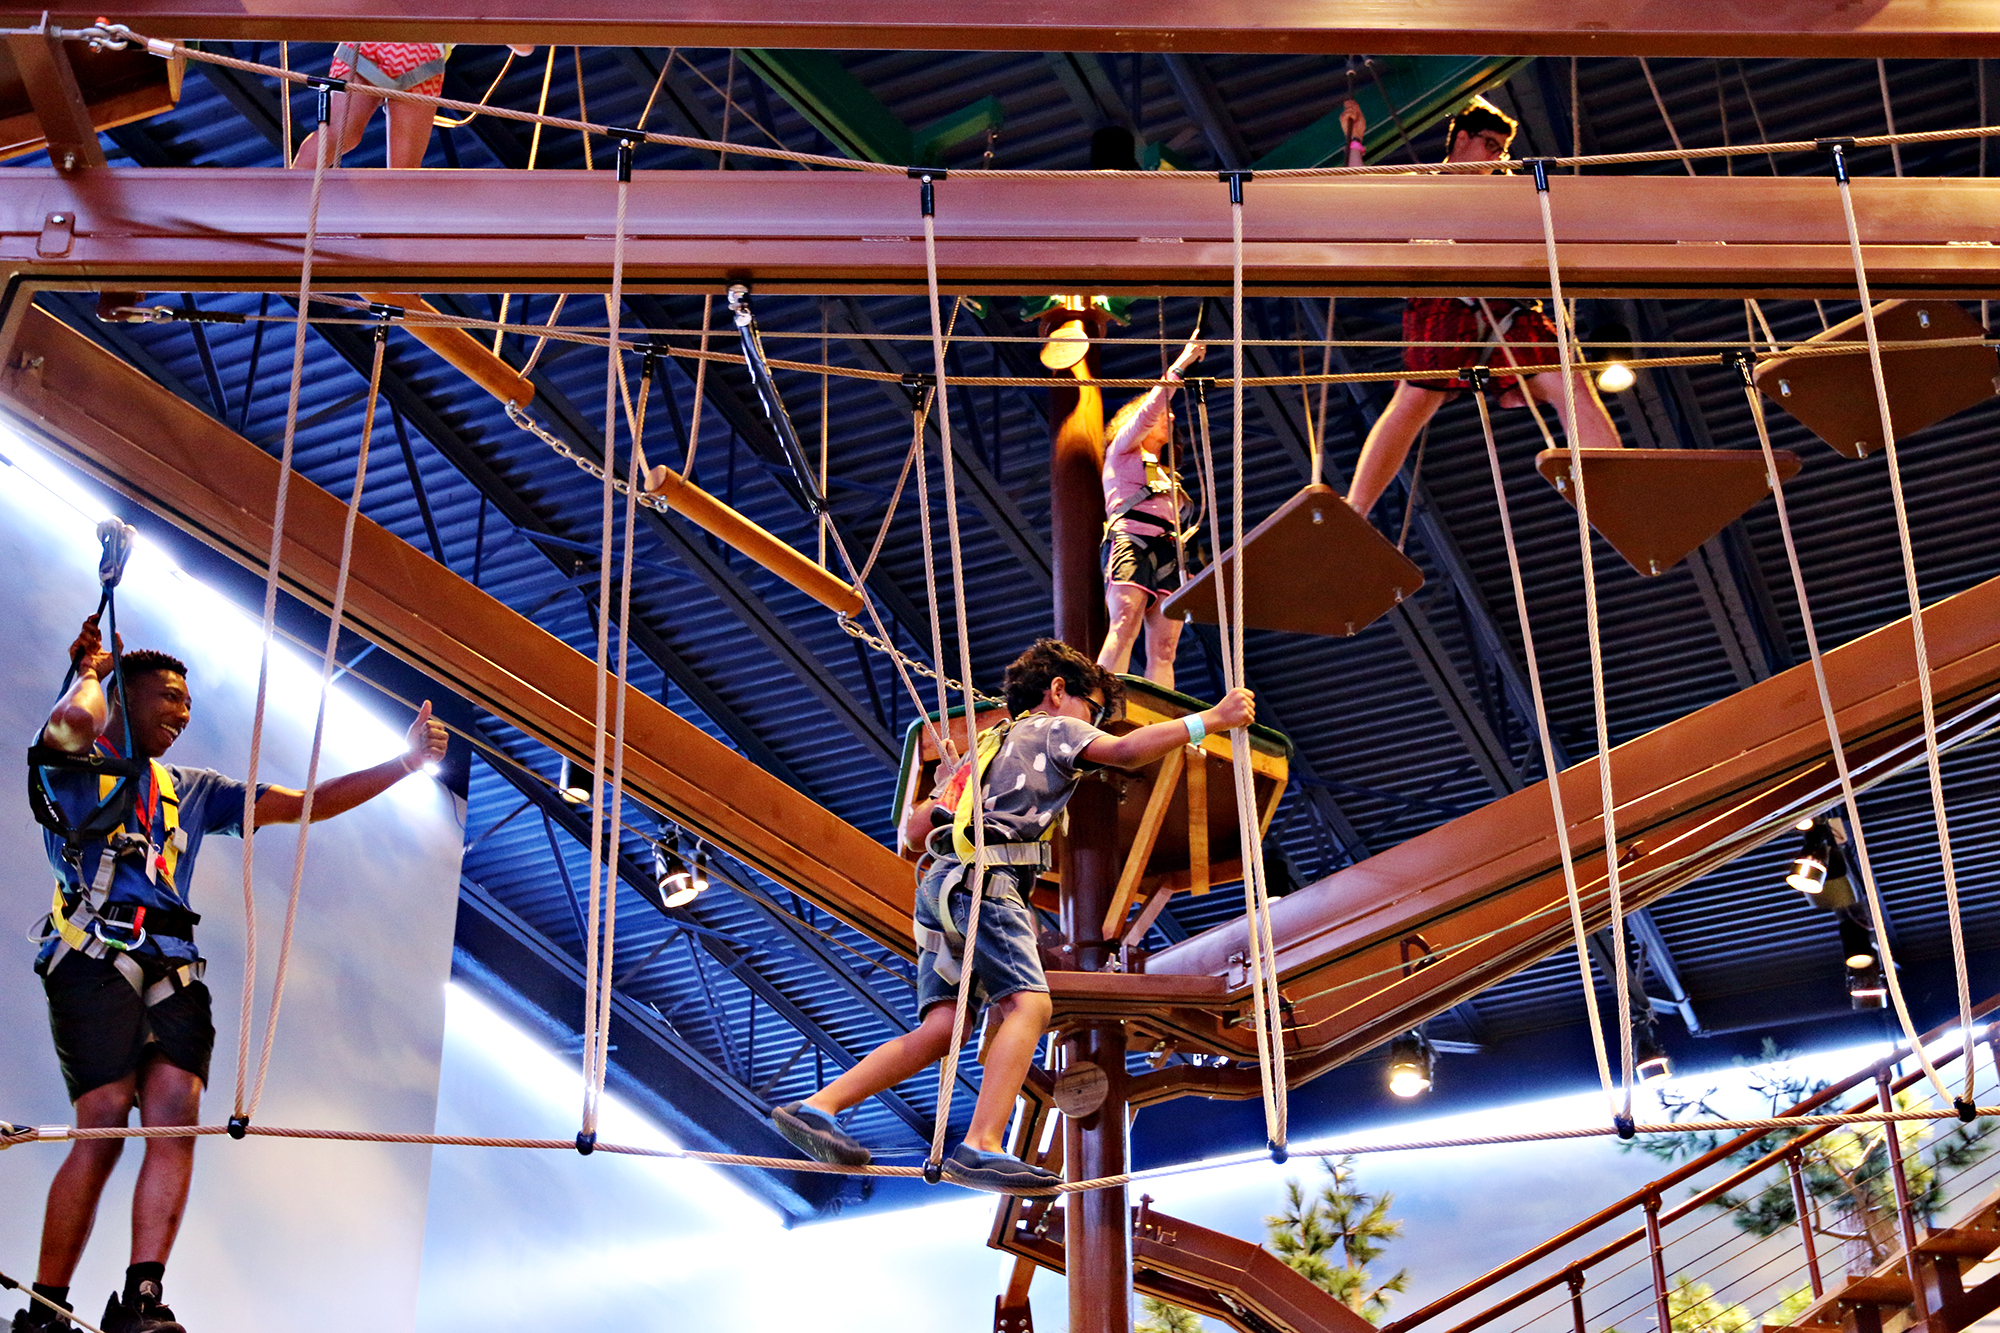 Kid Friendly Family Fun Attractions in Buford, GA